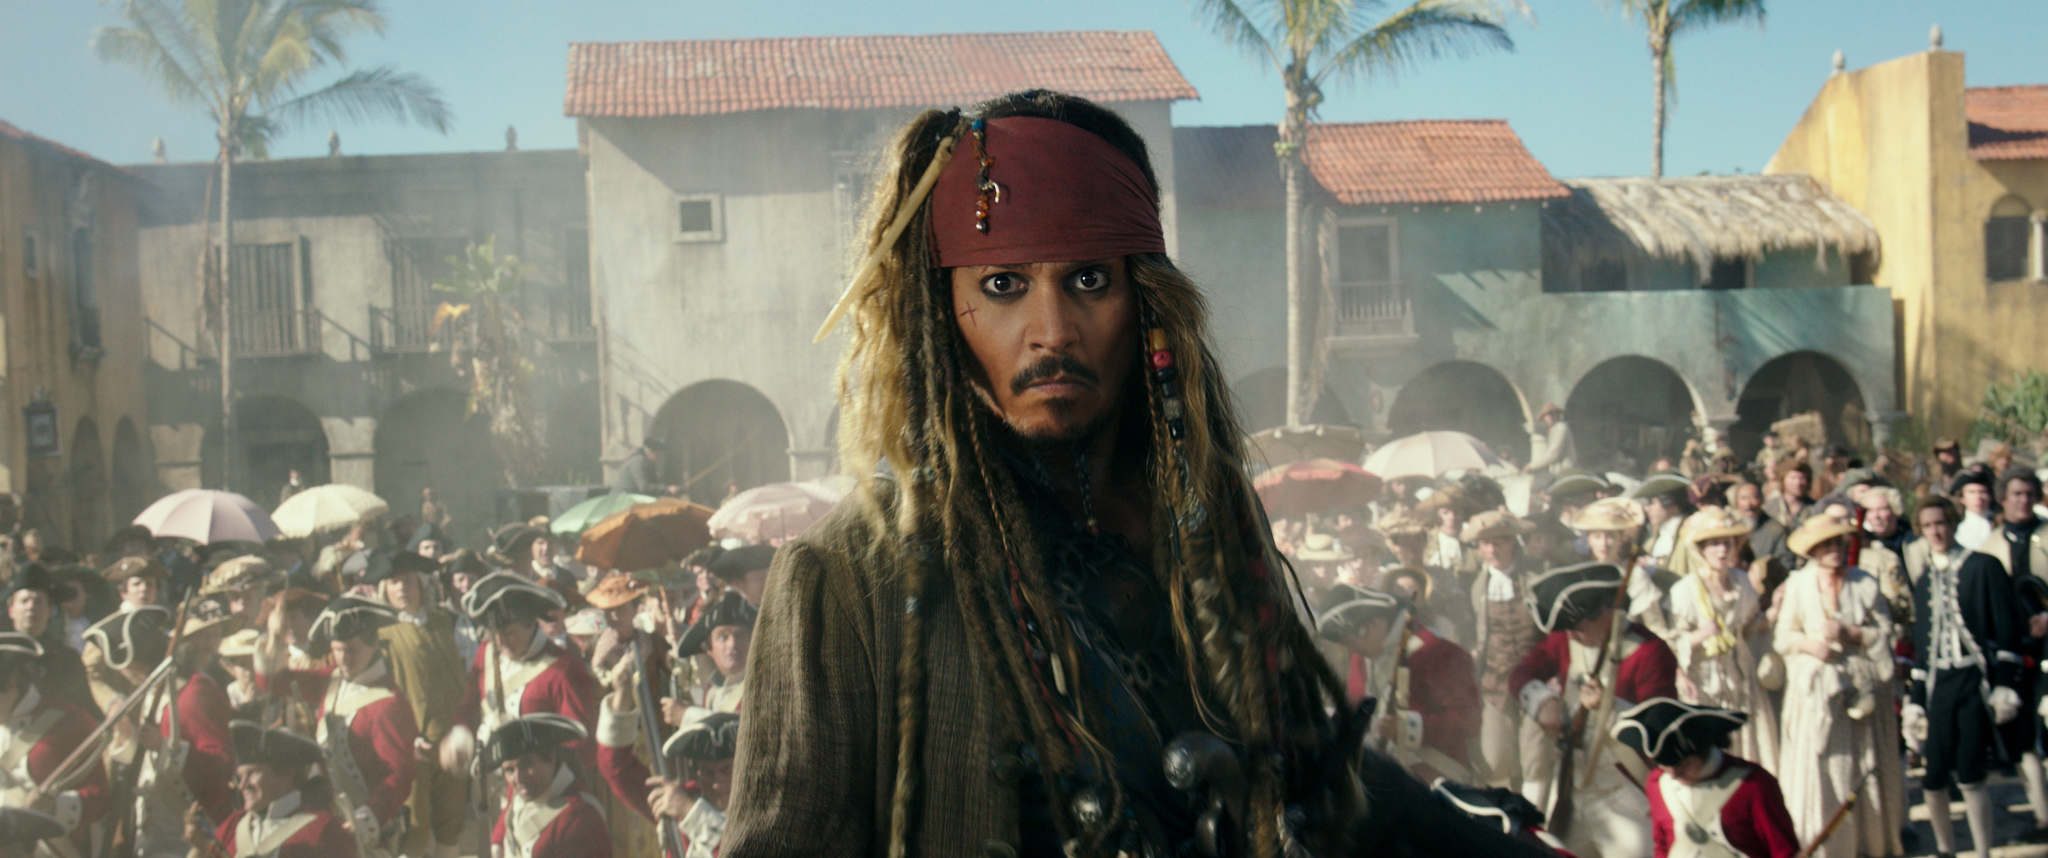 "Pirates of the Caribbean: Dead Men Tell No Tales" to Hold World Premiere at Shanghai Disneyland